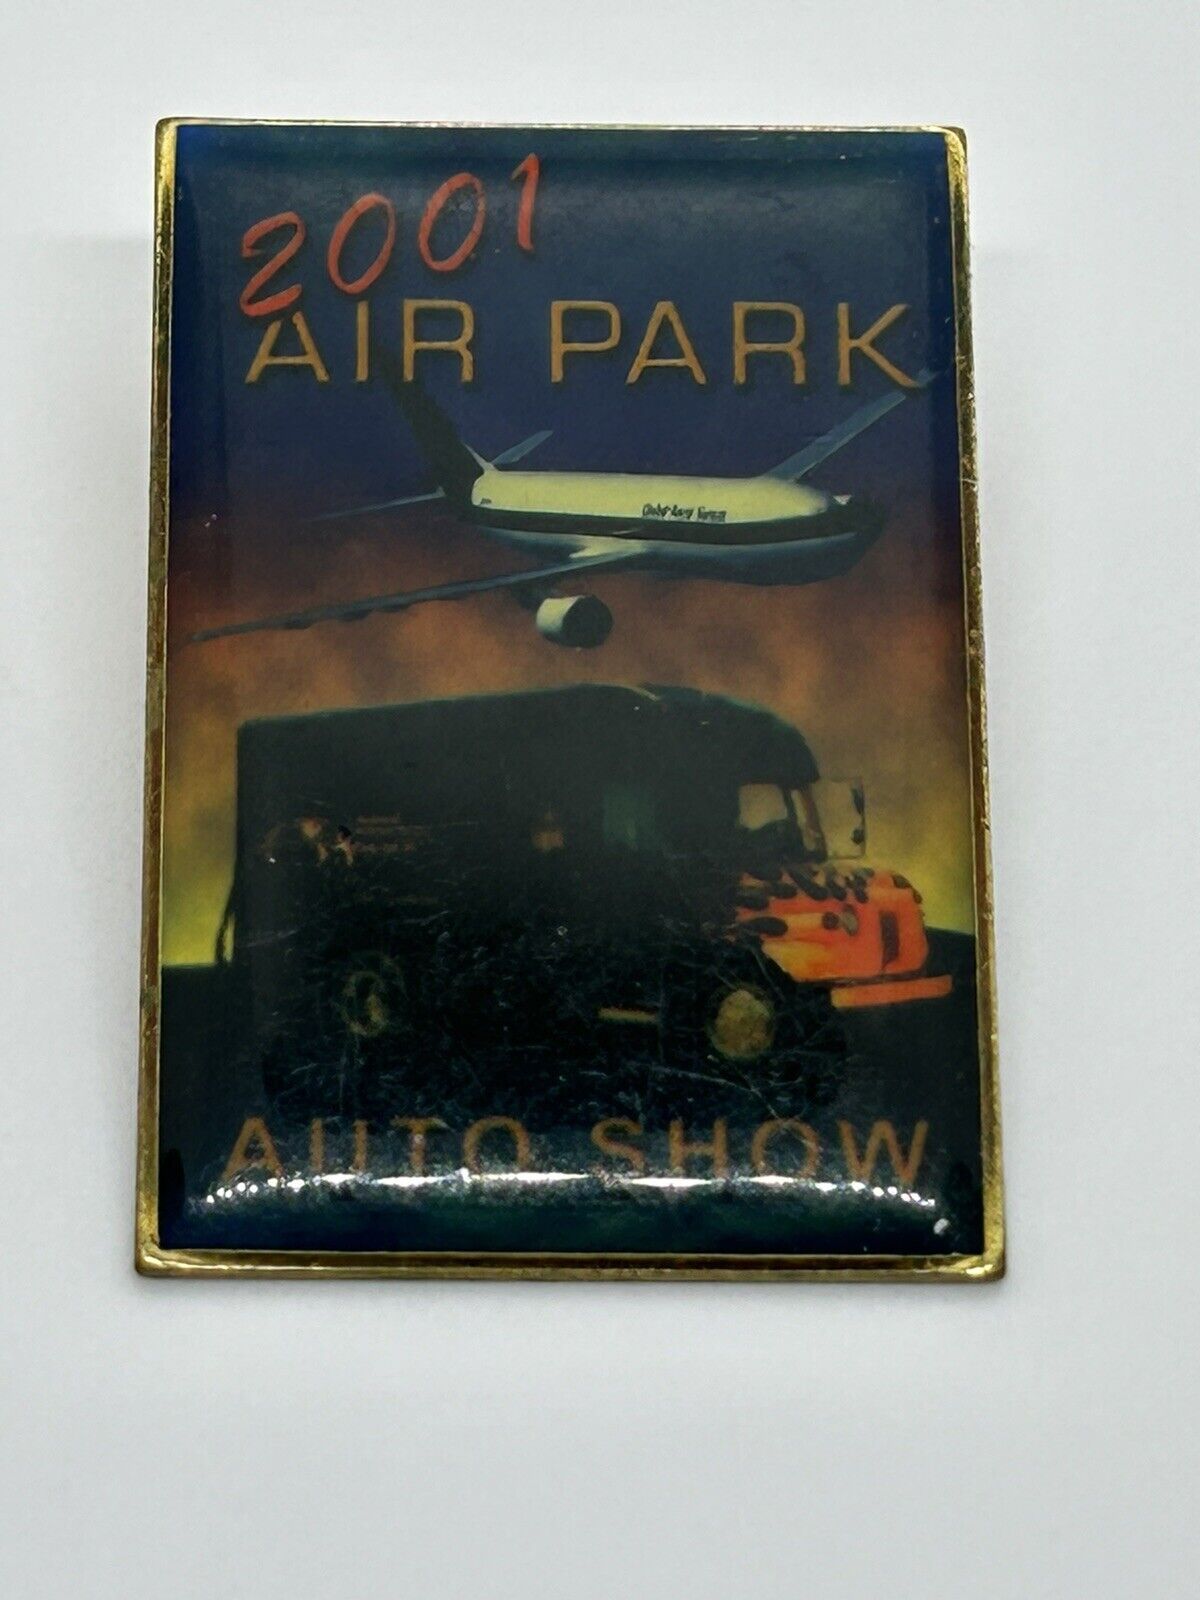 2001 Air Park Auto Show Plane Fiery Truck Blue Gold Tone Red Union Made USA